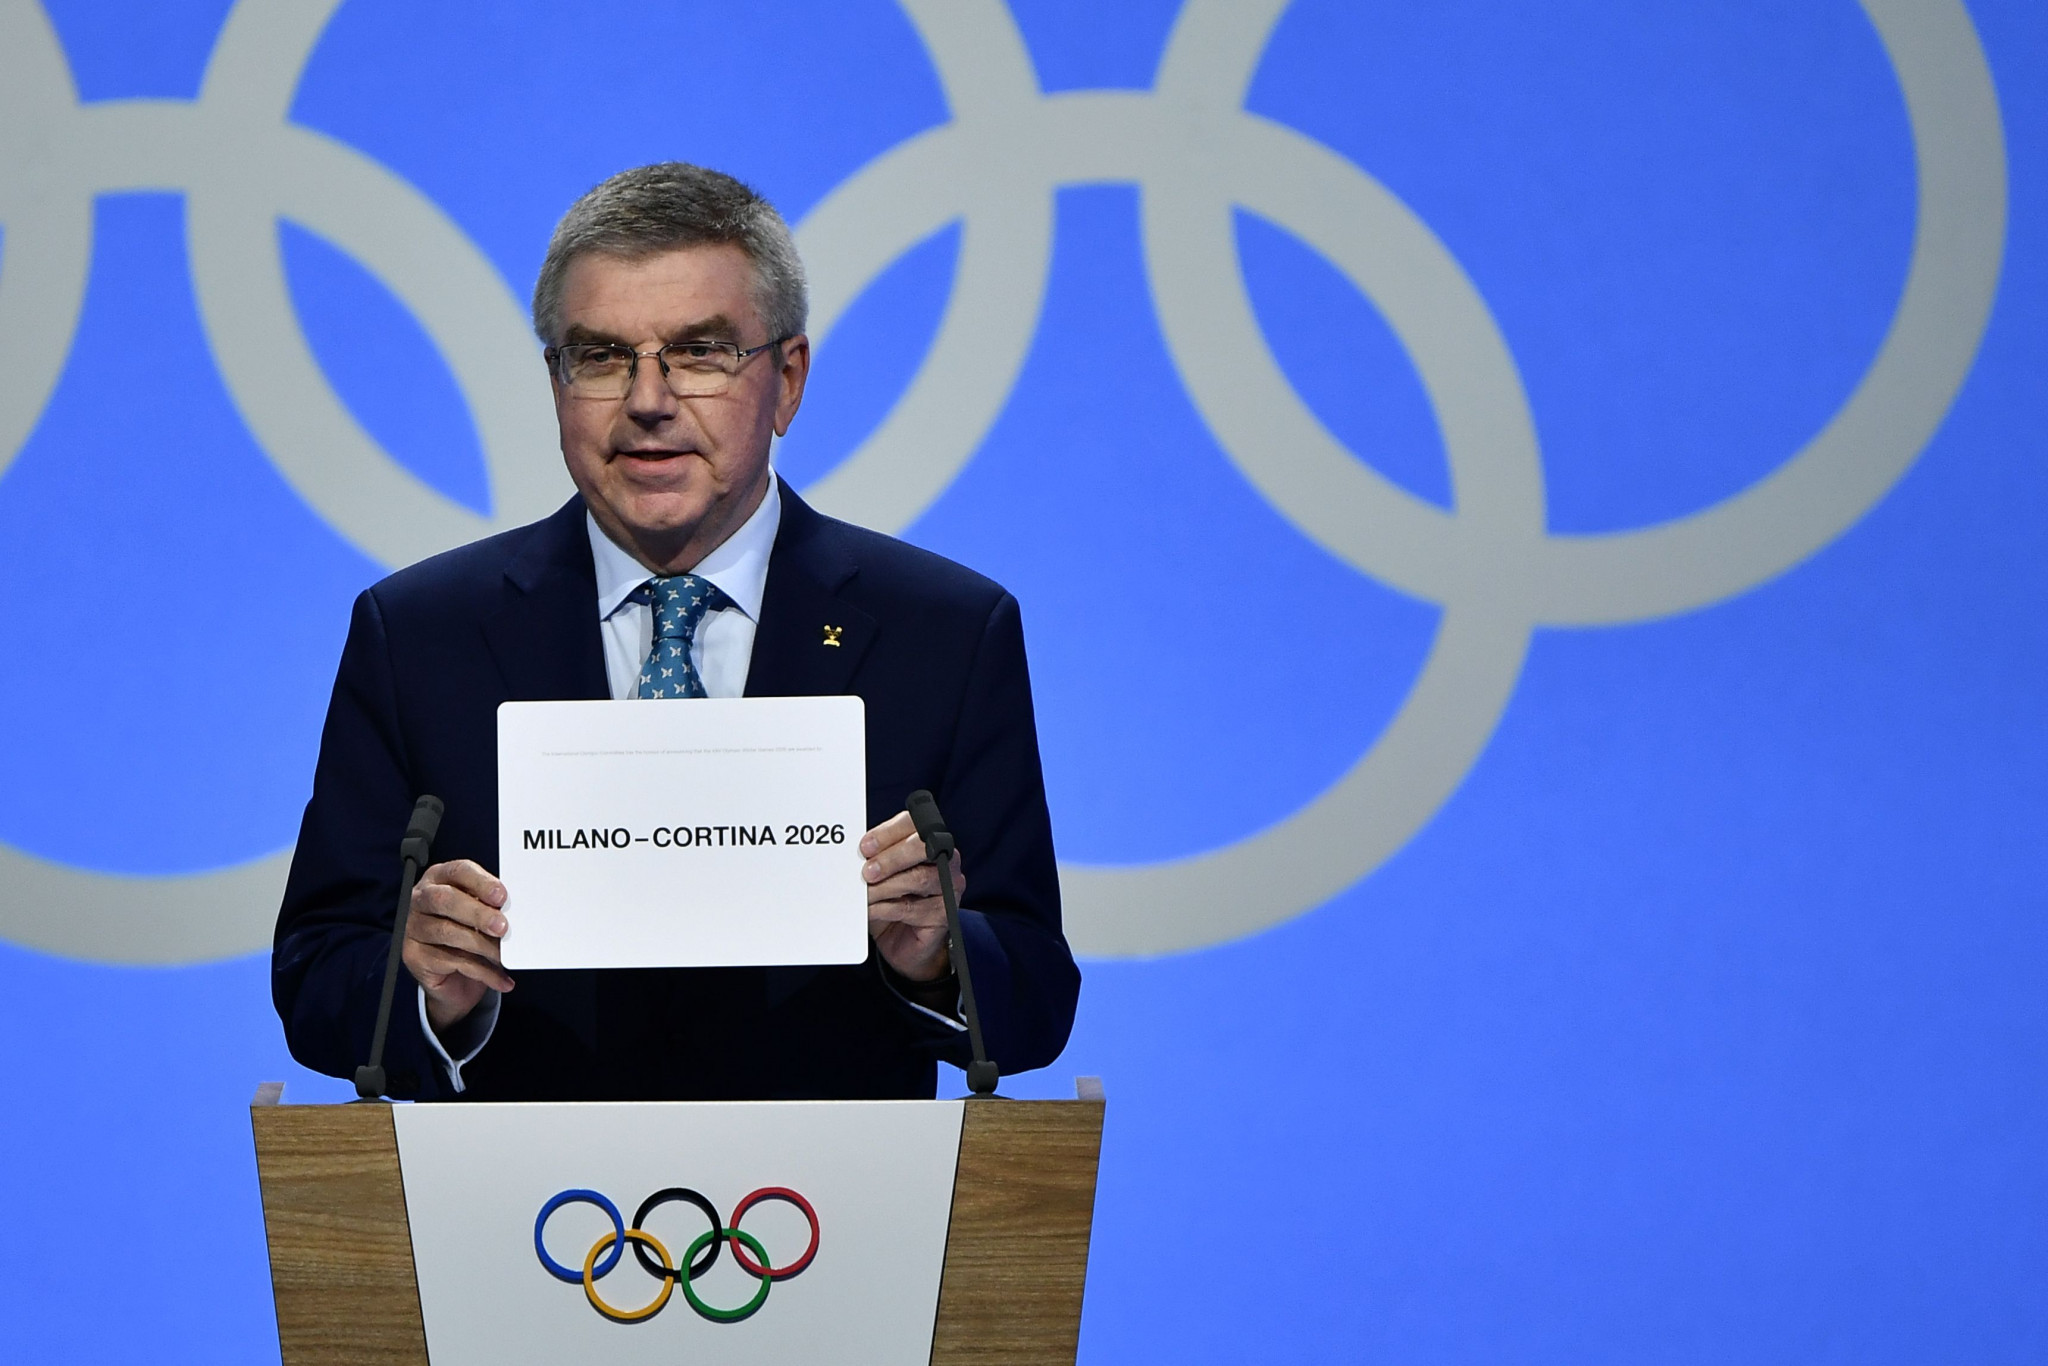 International Olympic Committee President Thomas Bach announces Milan Cortina as the host of the 2026 Winter Olympic and Paralympic Games ©Getty Images